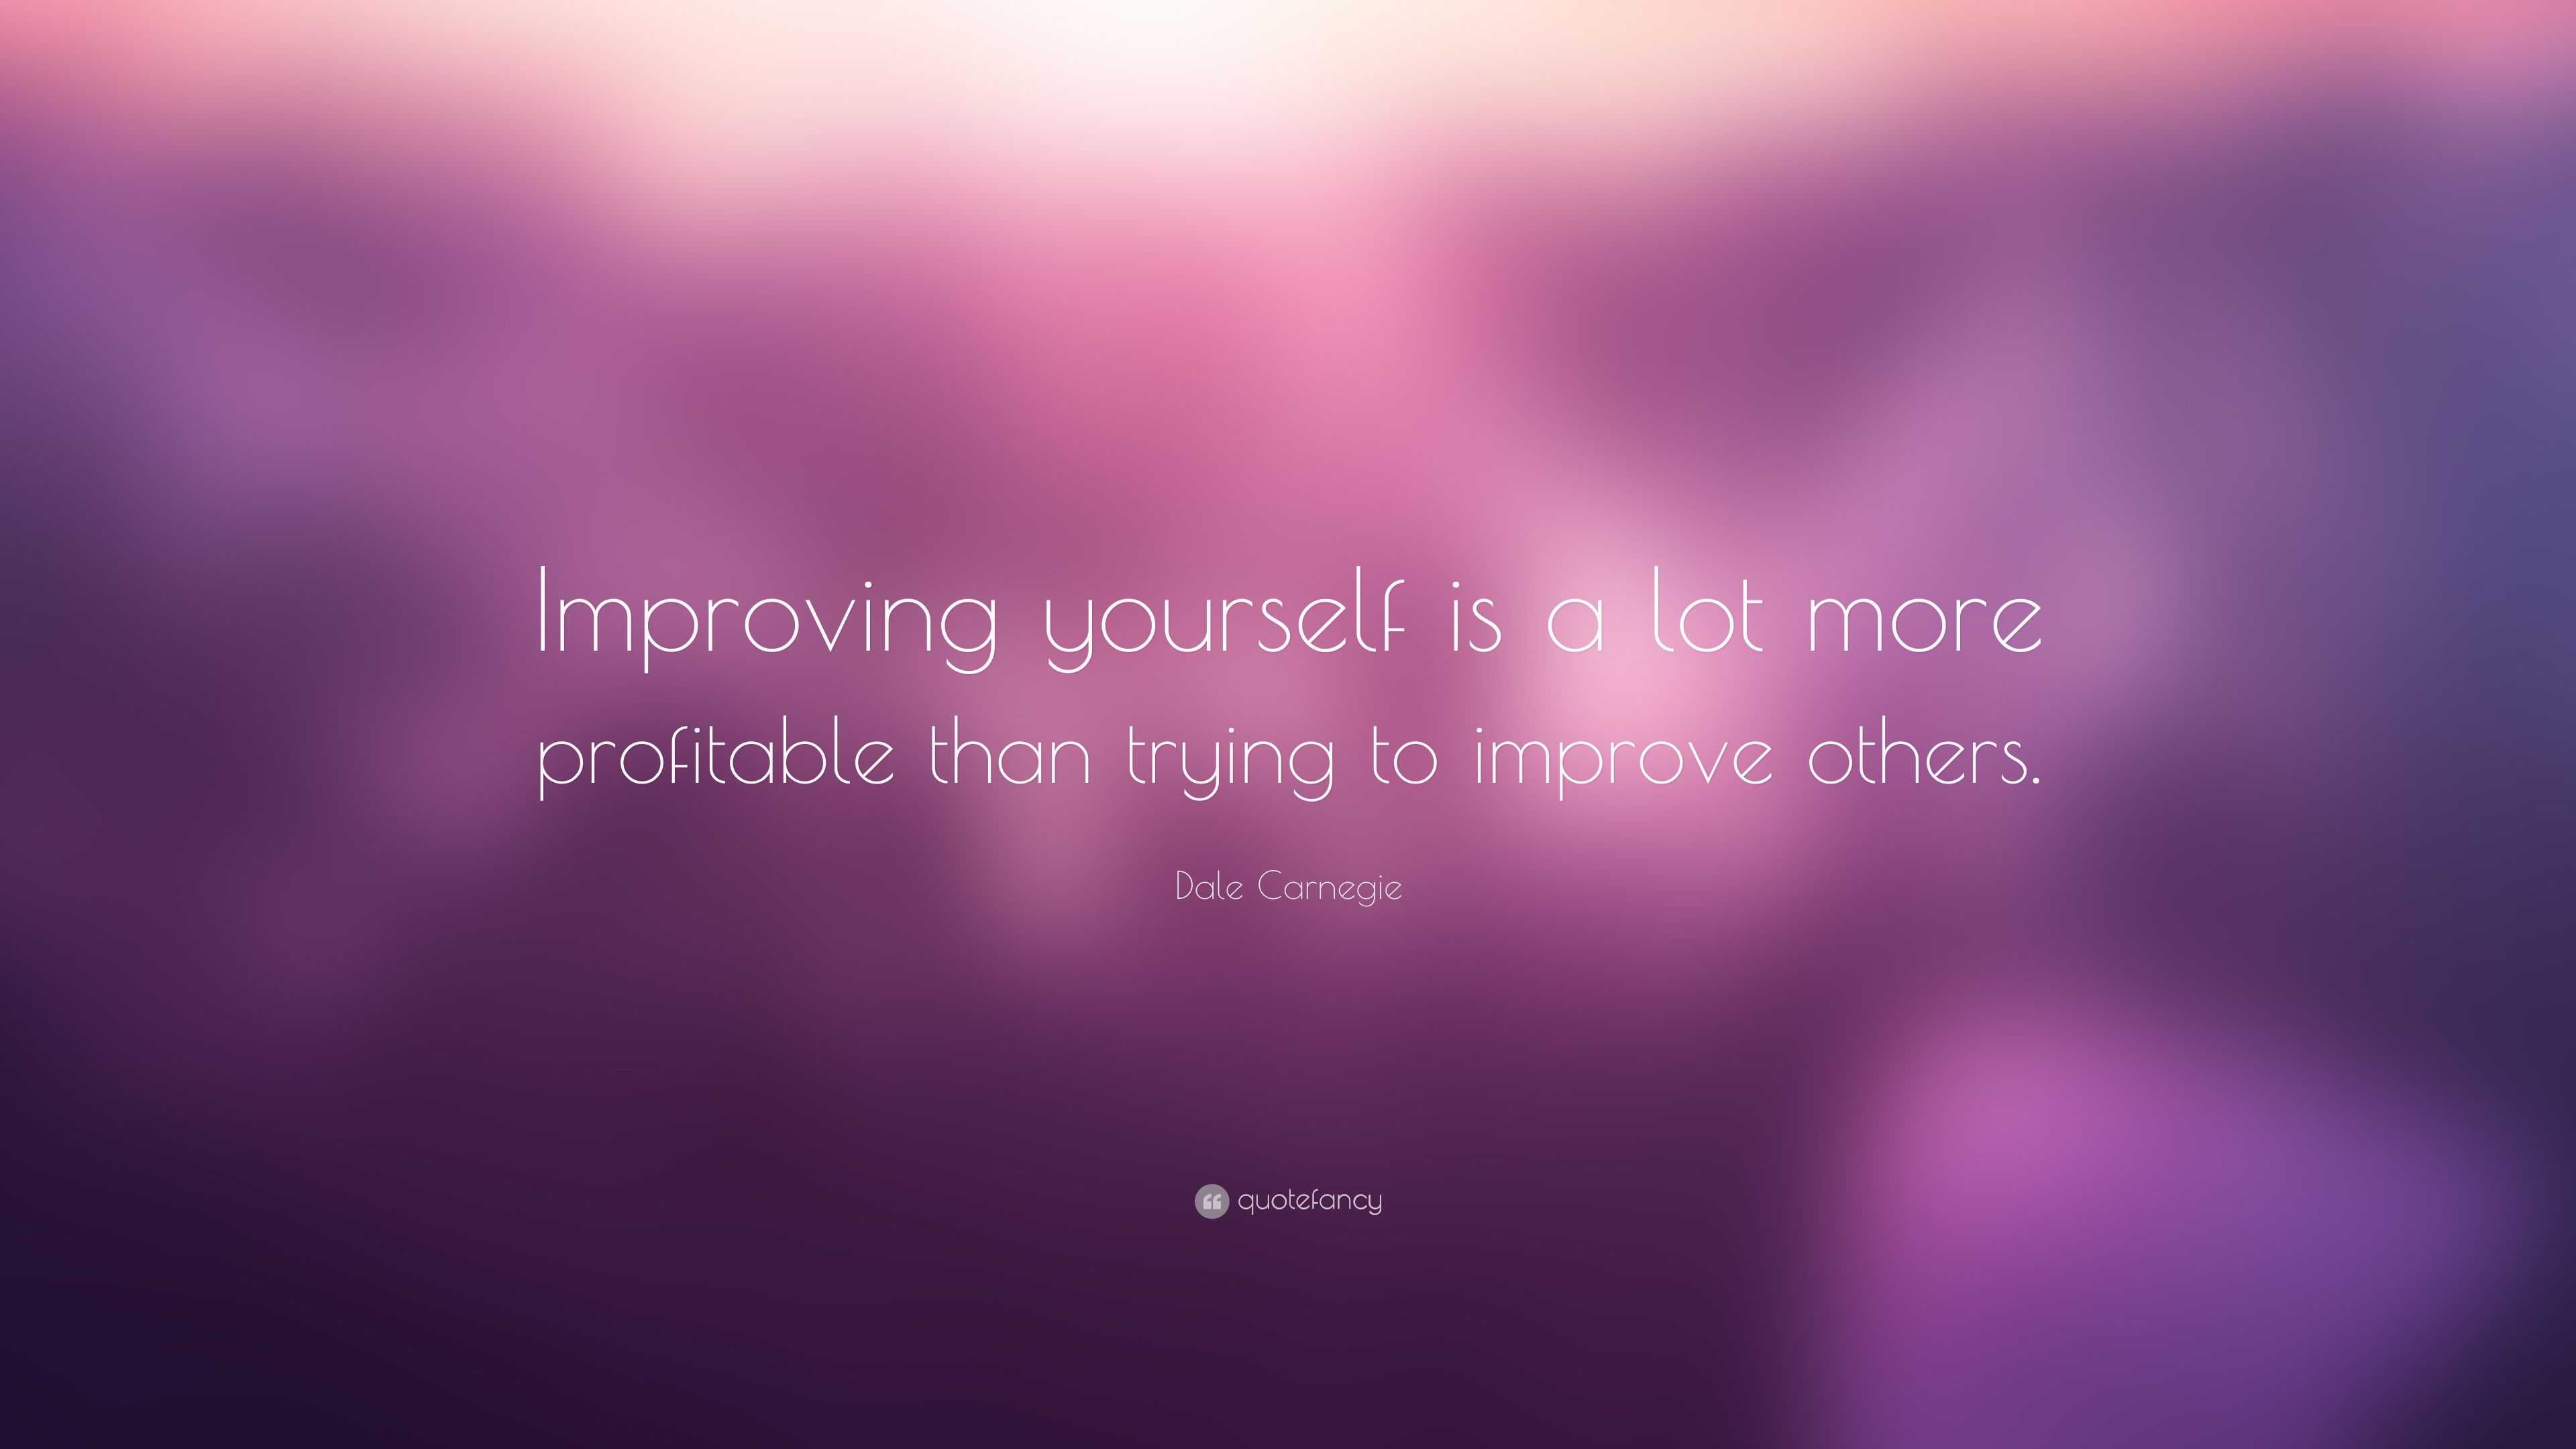 Dale Carnegie Quote: “Improving yourself is a lot more profitable than ...